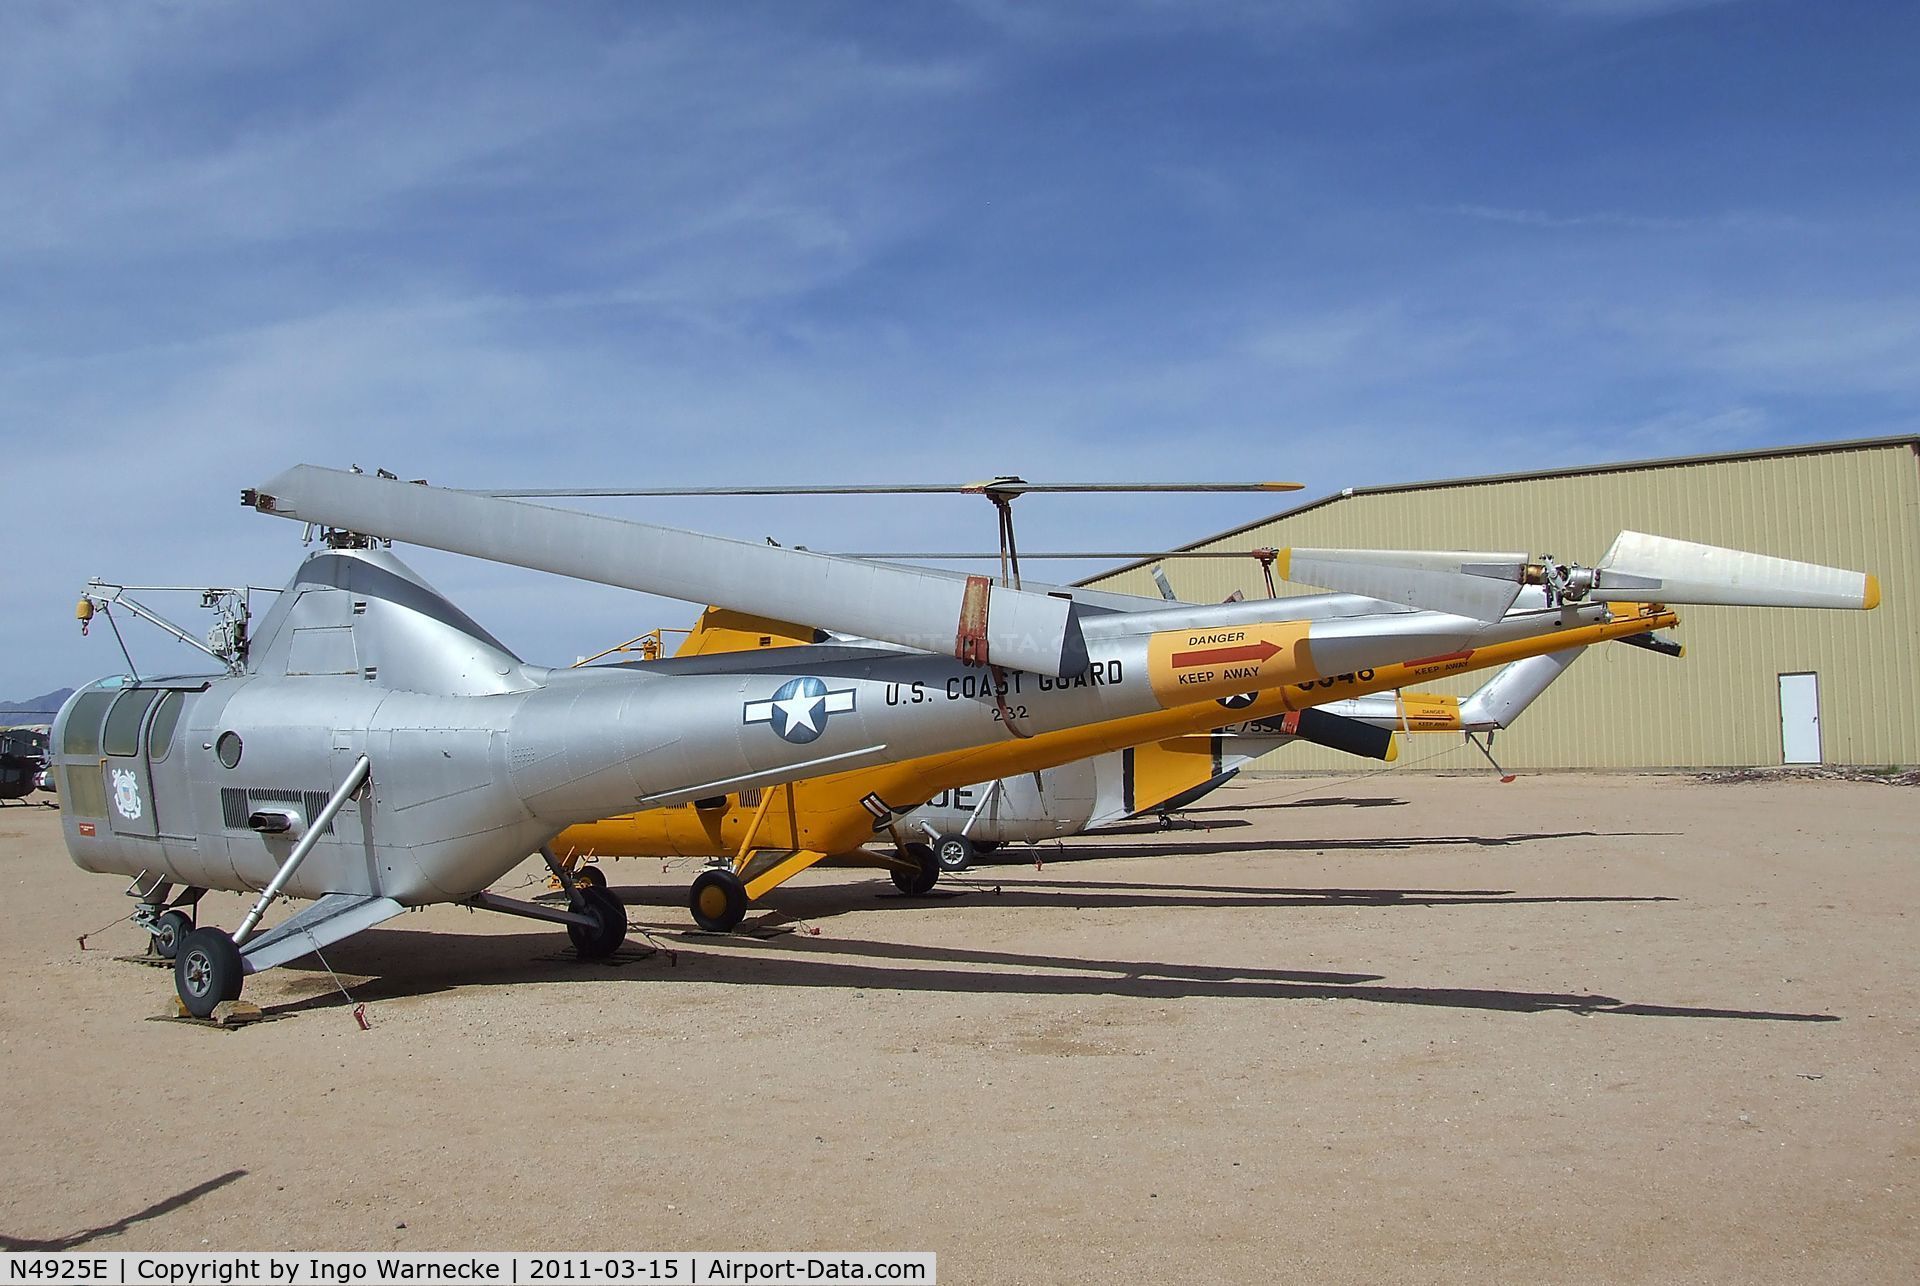 N4925E, 1946 Sikorsky S-51 C/N 232, Sikorsky HO3S-1 Dragonfly at the Pima Air & Space Museum, Tucson AZ